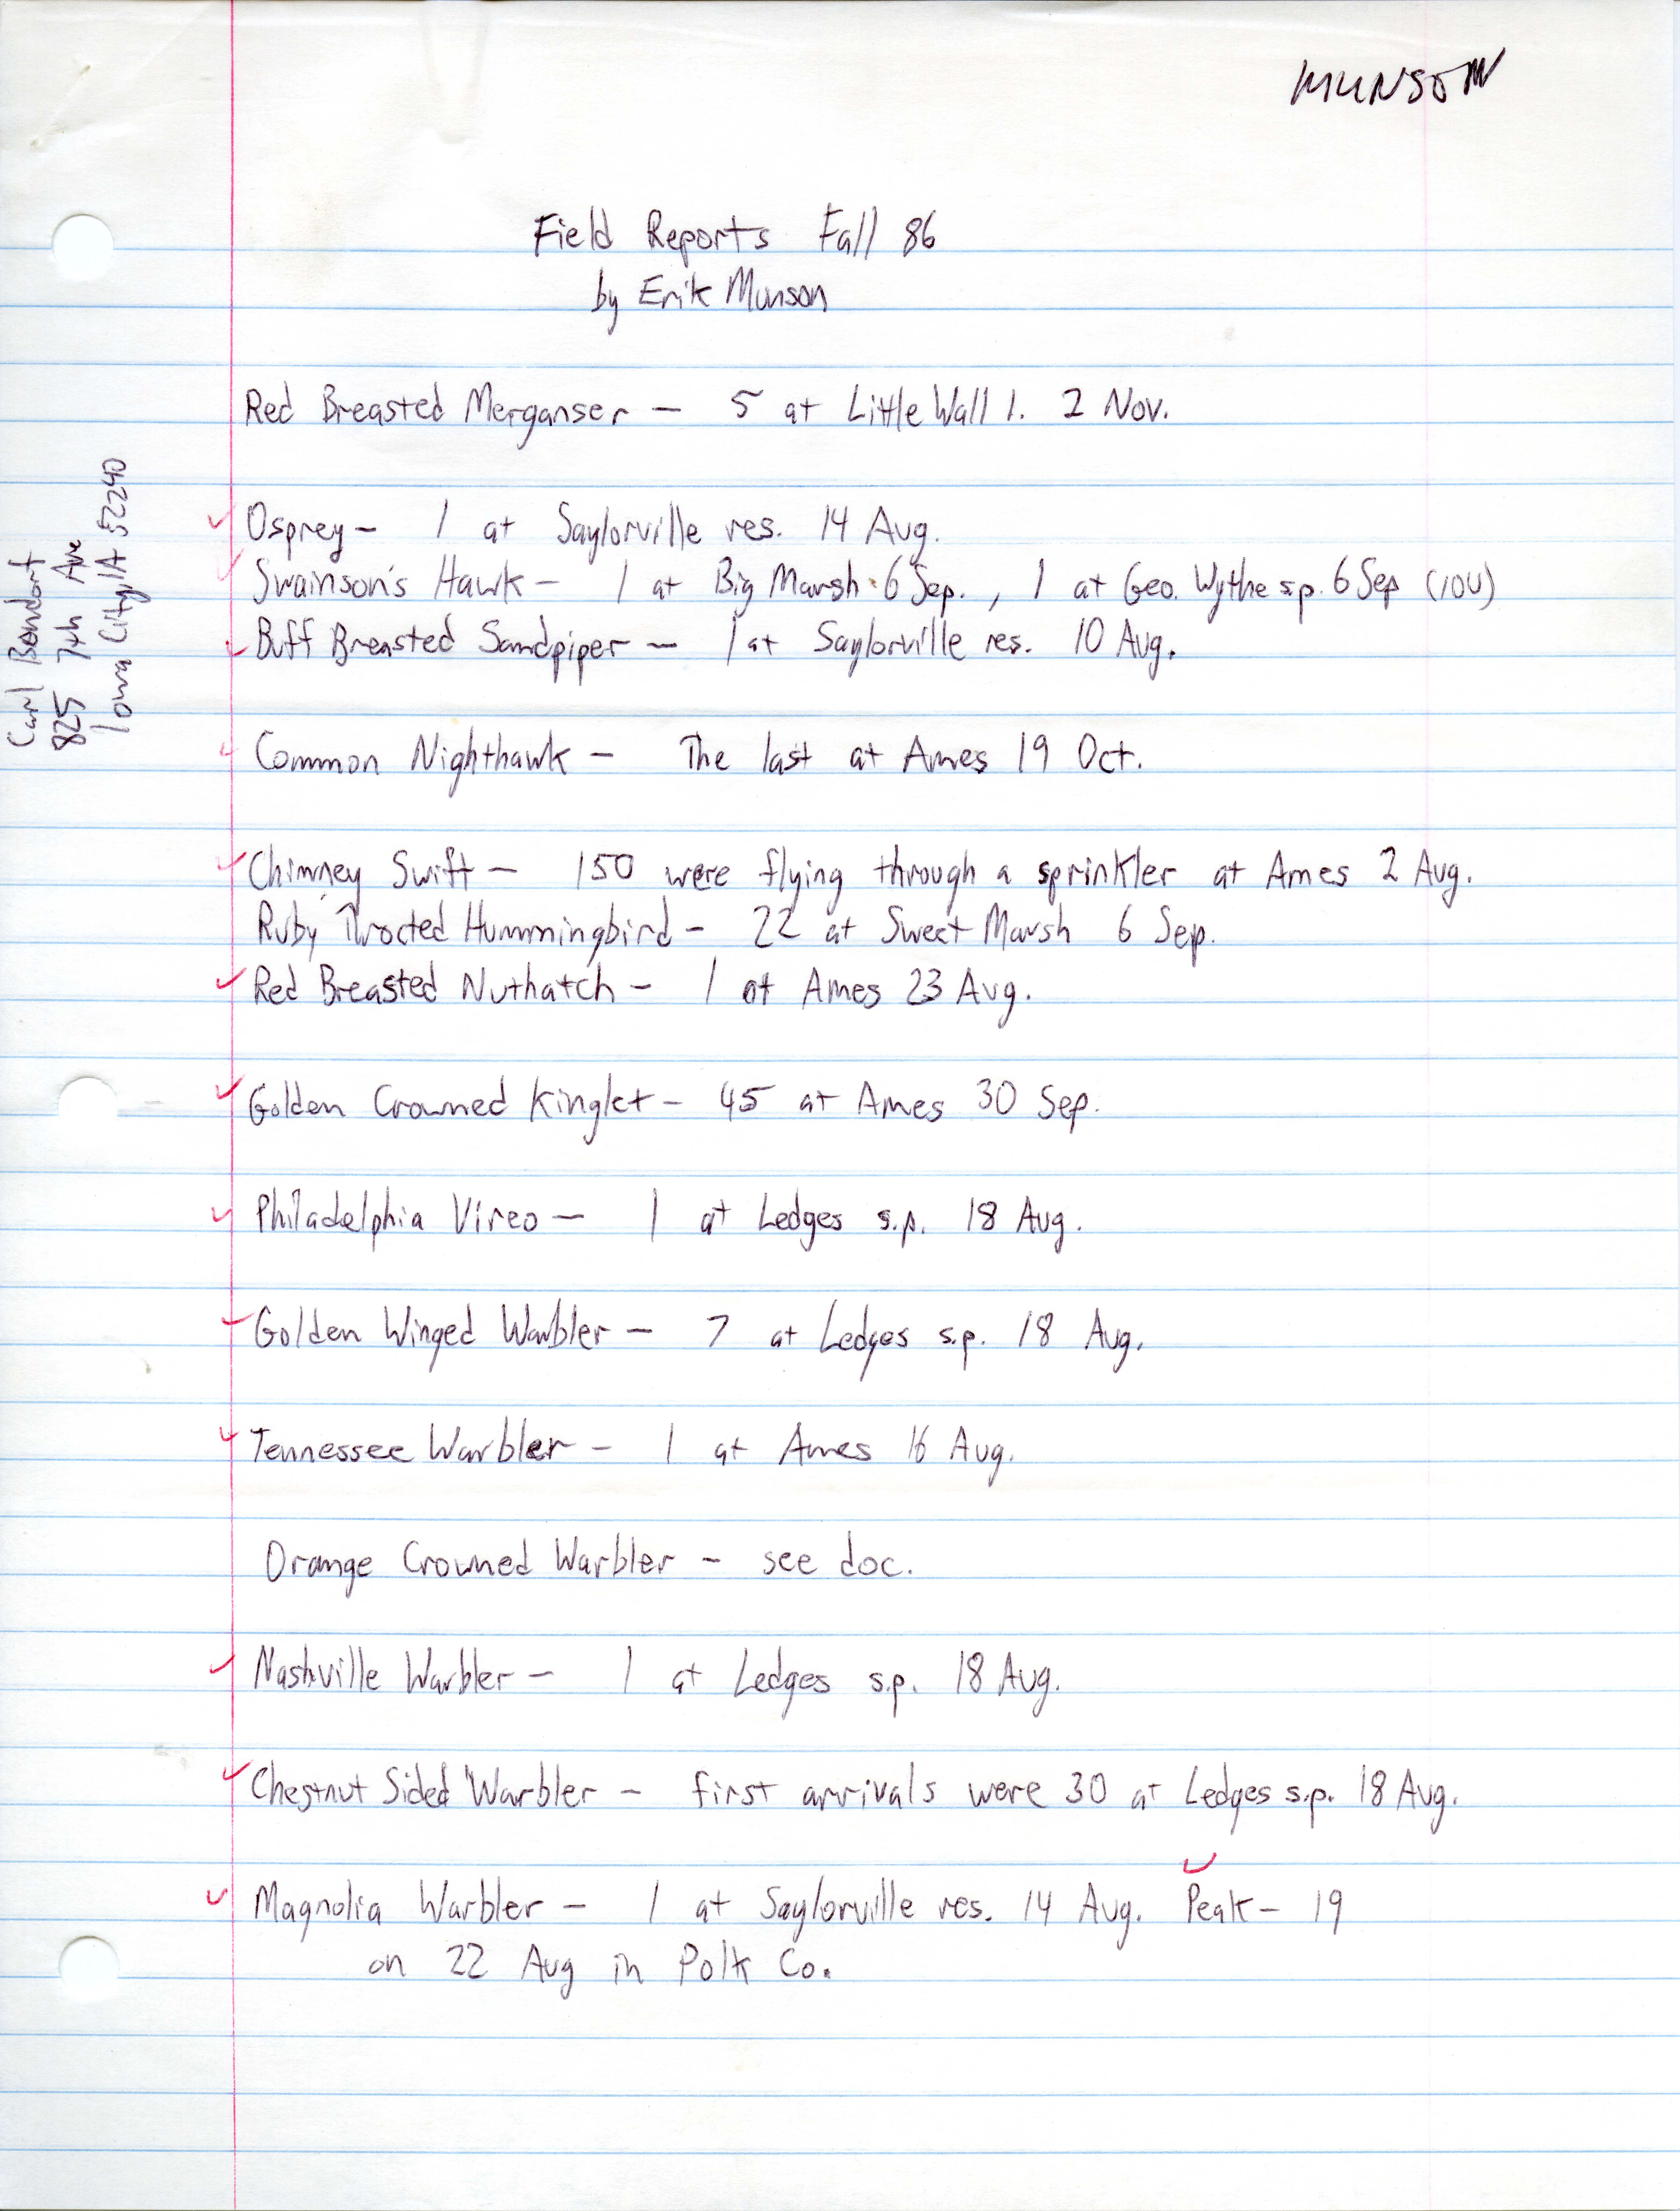 Field notes contributed by Erik Munson, fall 1986